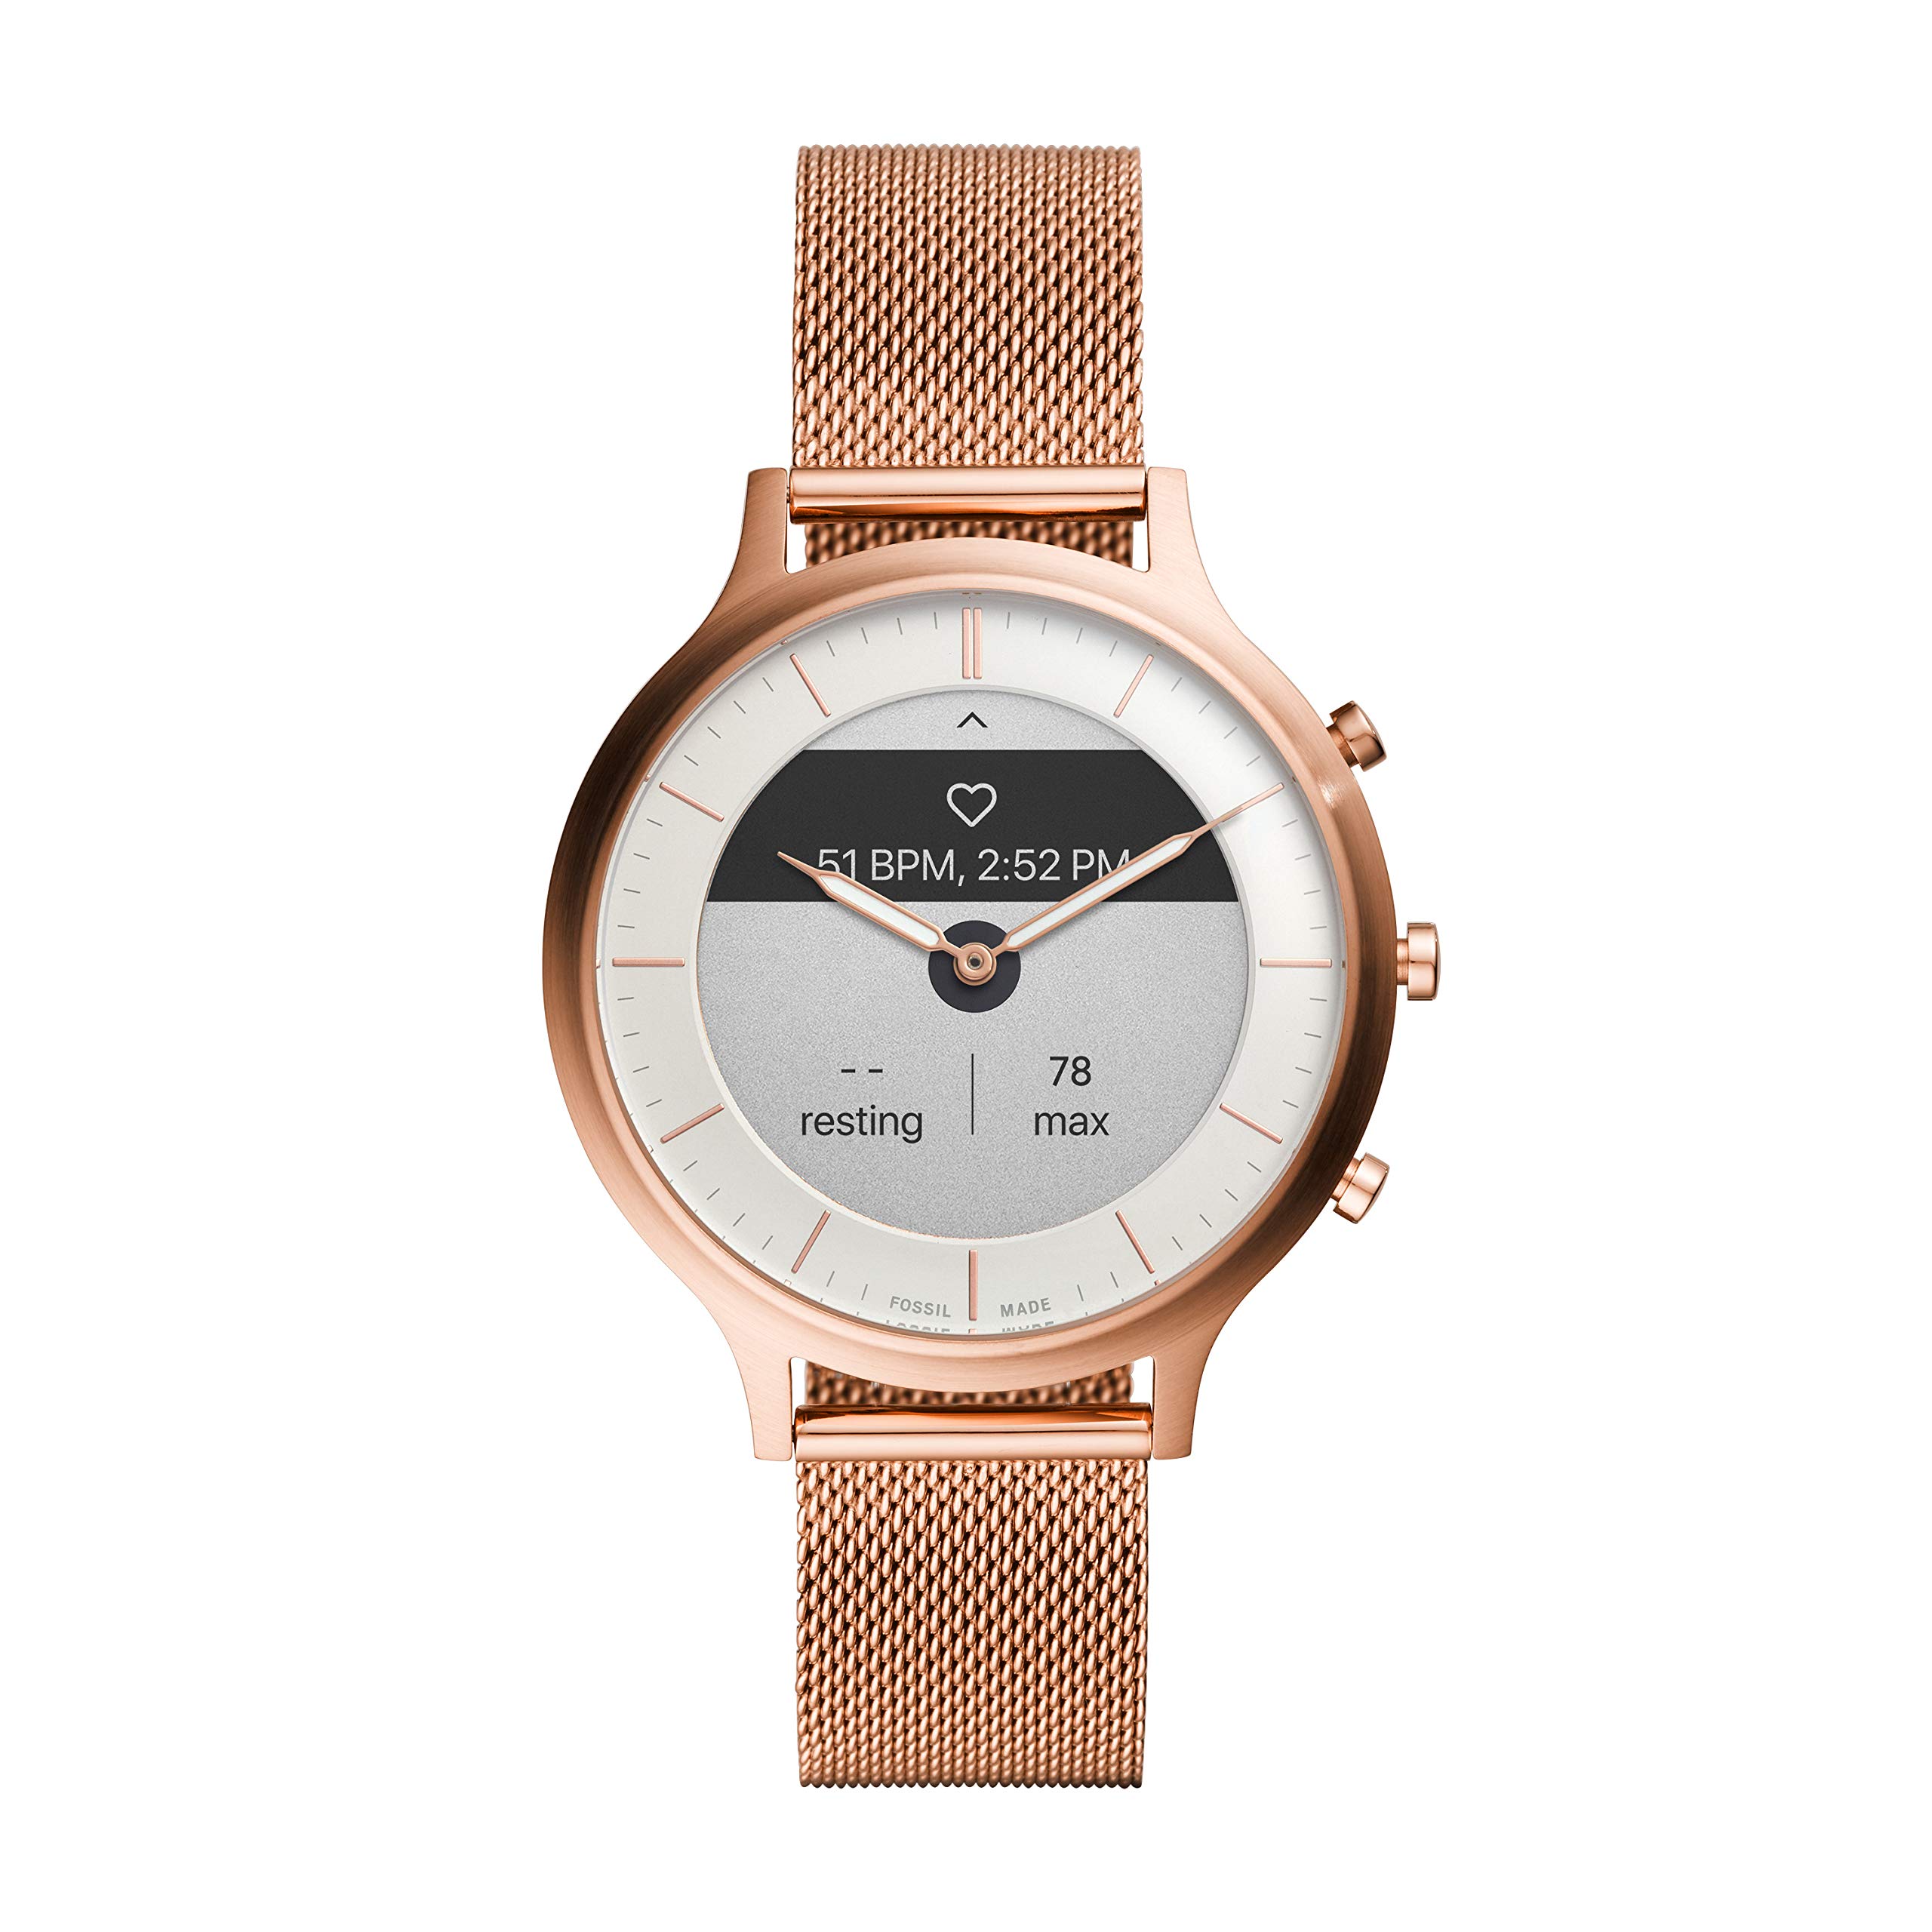 Fossil Women's Charter Hybrid Smartwatch HR with Always-On Readout Display, Heart Rate, Activity Tracking, Smartphone Notifications, Message Previews